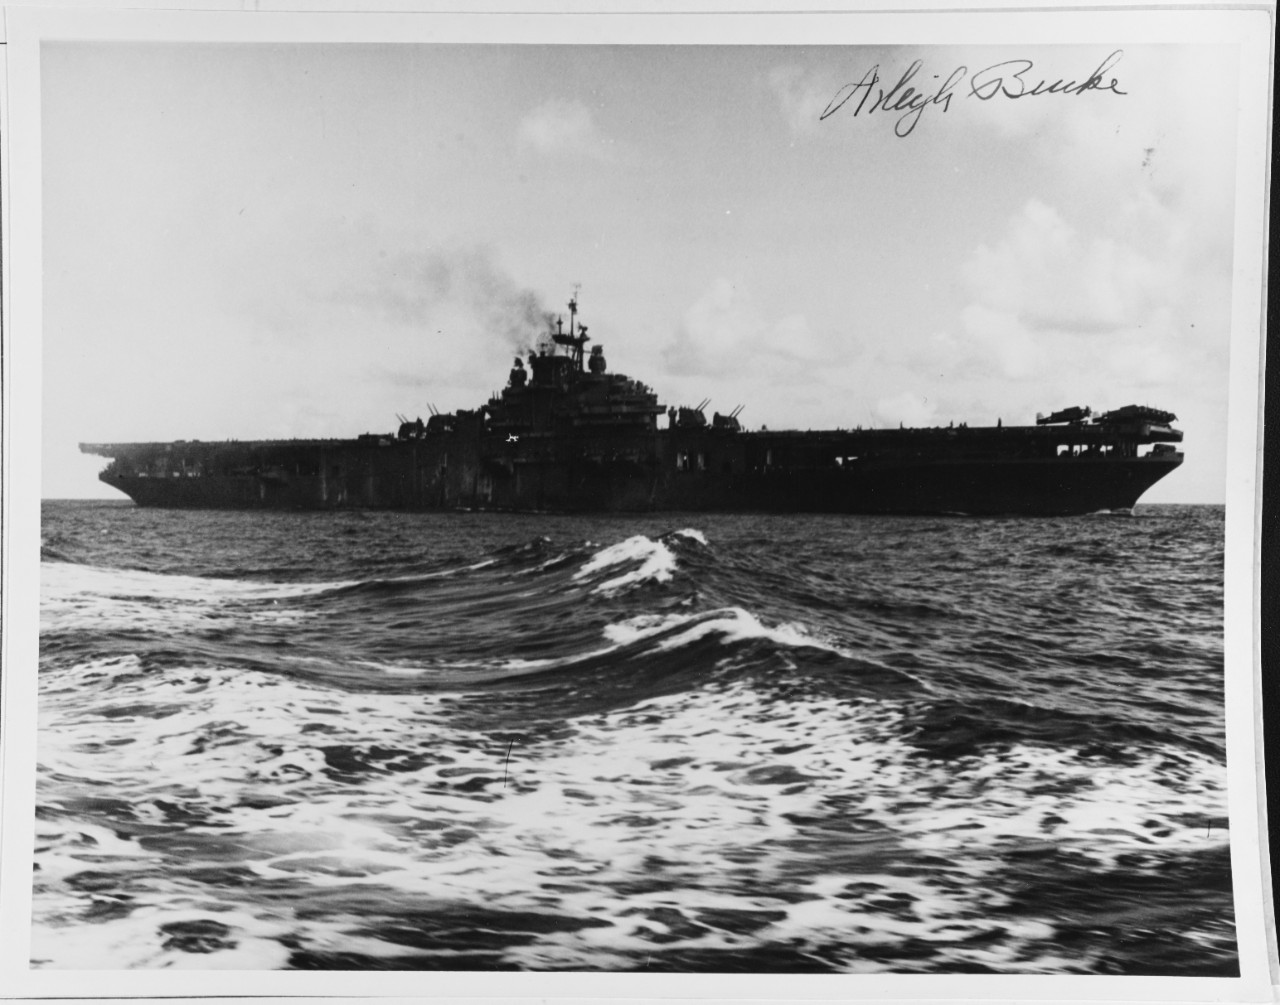 USS RANDOLPH (CV-15) Admiral A. Burke was assigned to First Carrier Task Force, Pacific, from March 1944 -- May 1945